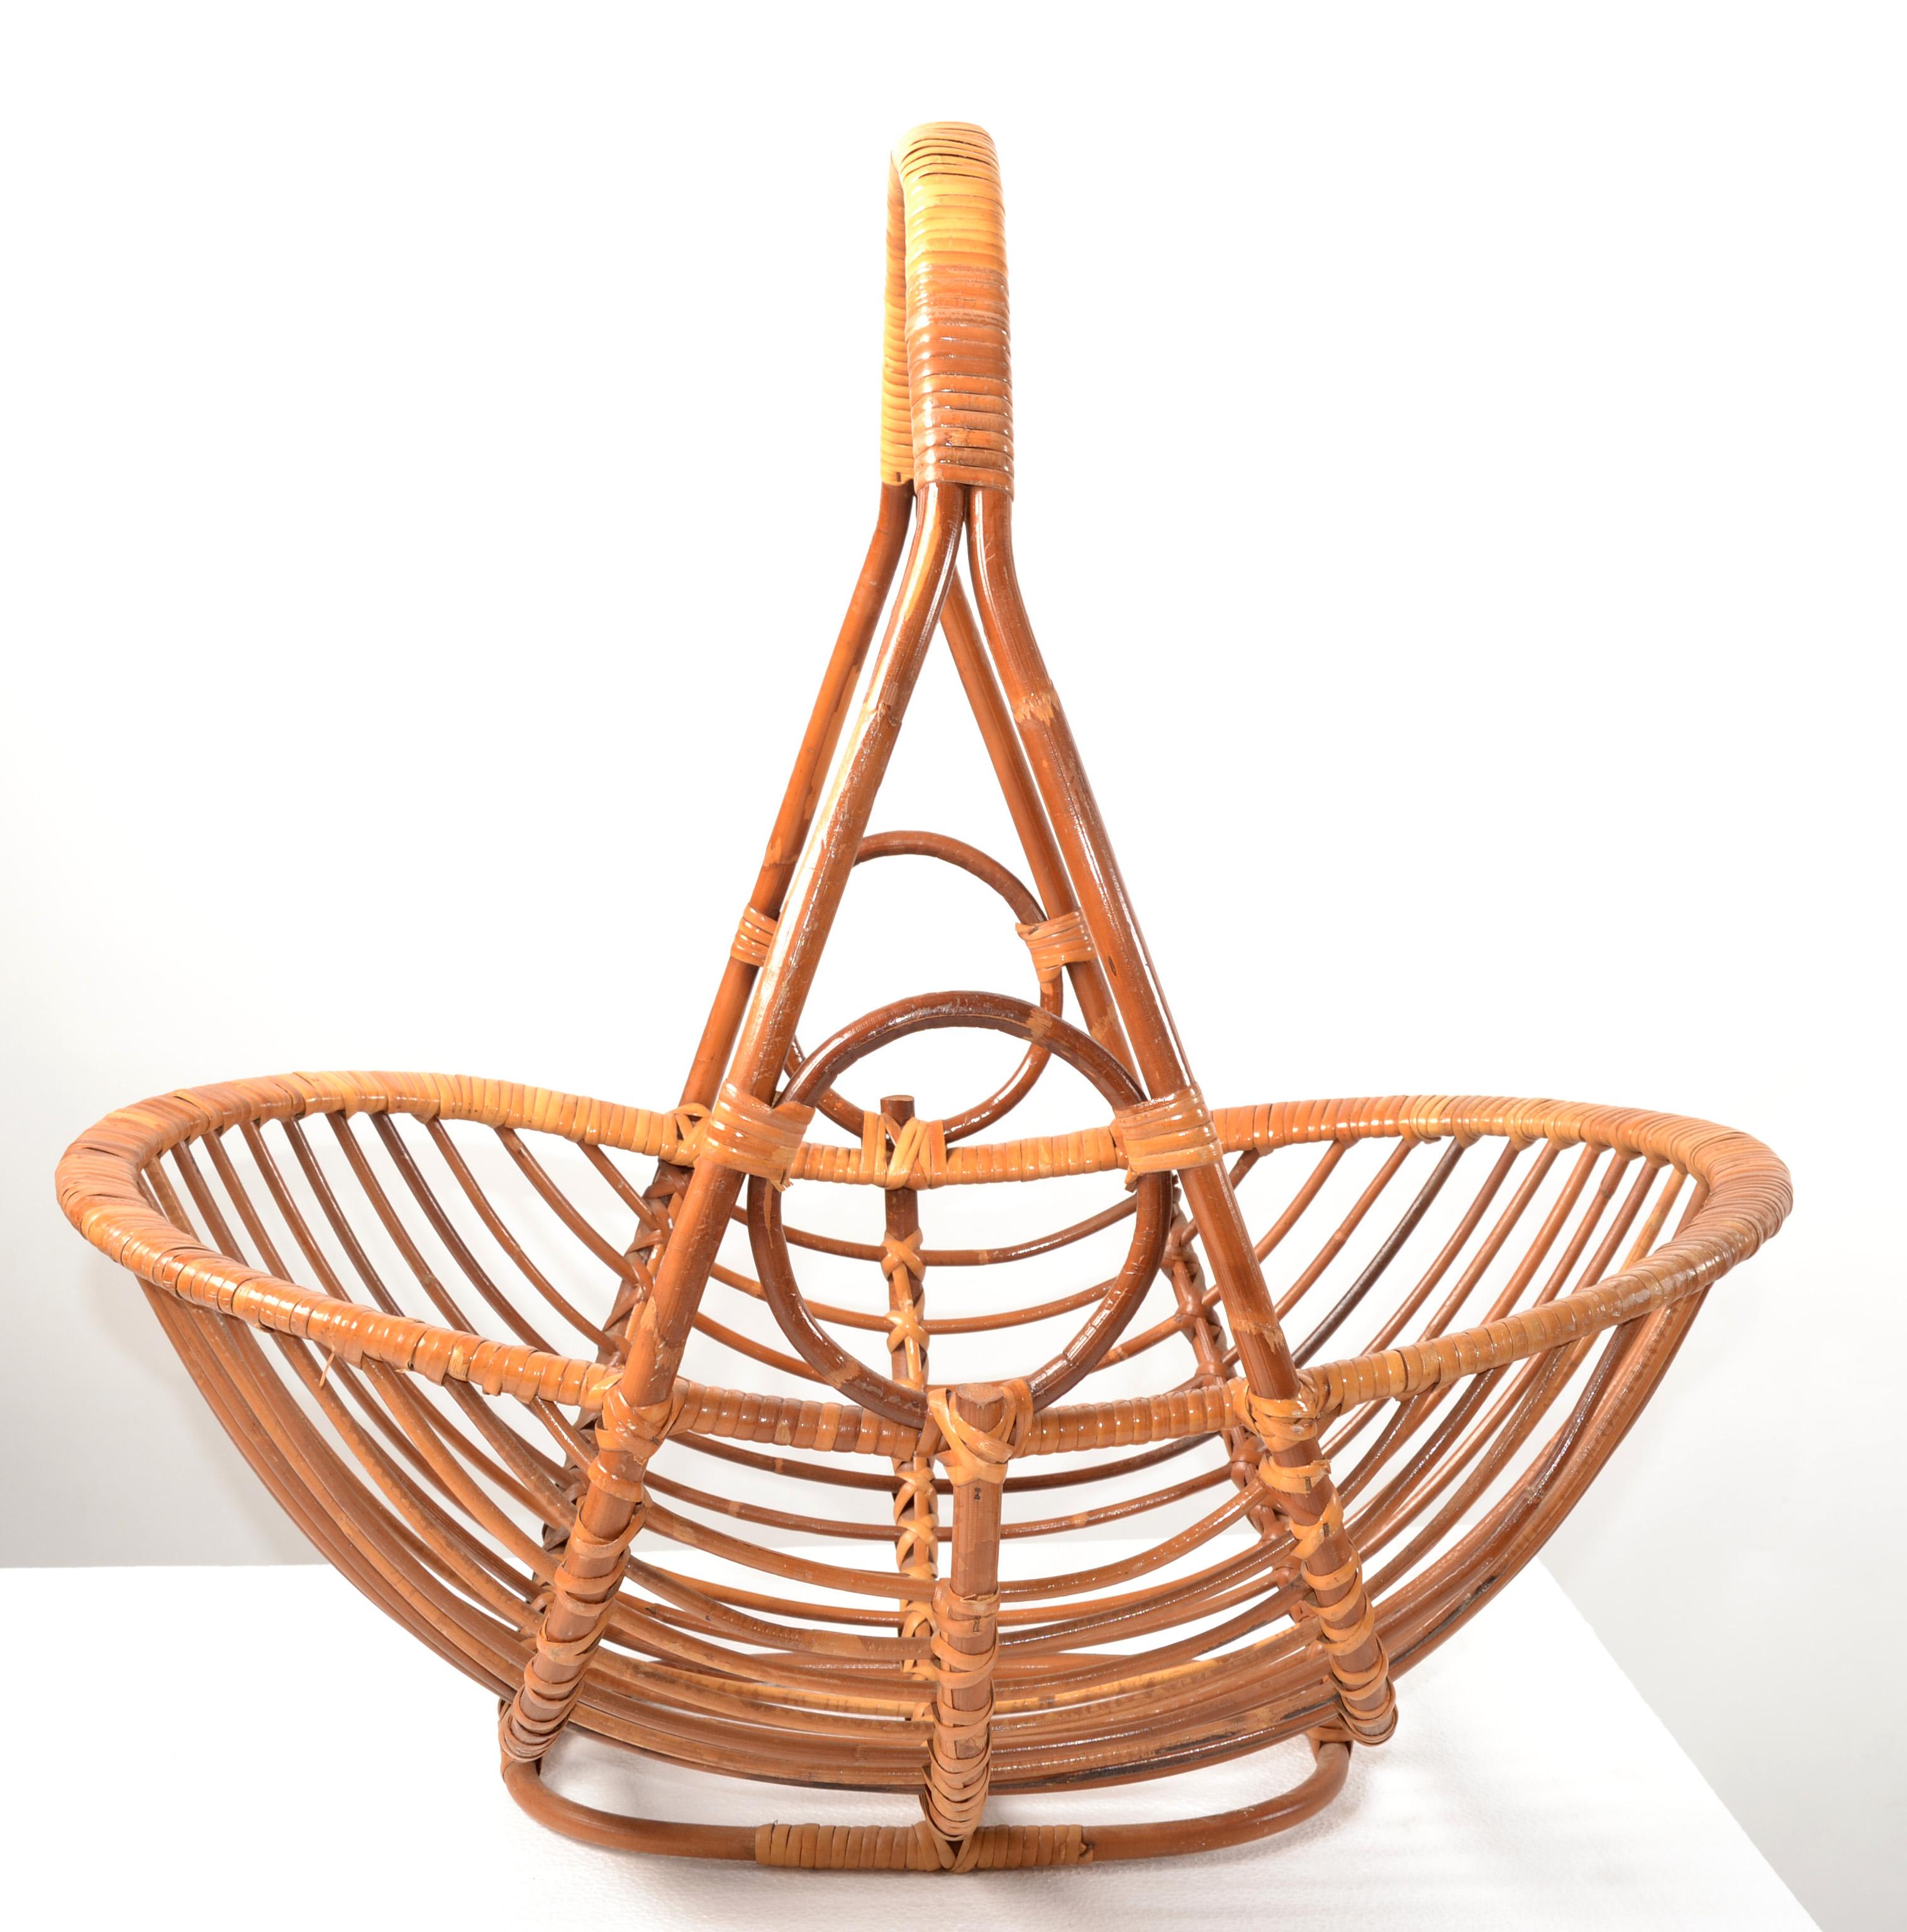 Boho Chic handwoven Bamboo, Reed and Caning Magazine Stand, Newspaper Basket, Book Rack made in the Mid-20th century.  
Open Weave with lots of details and technics. Stunner Craftsmanship.
This Basket is very useful and adaptable due to its design